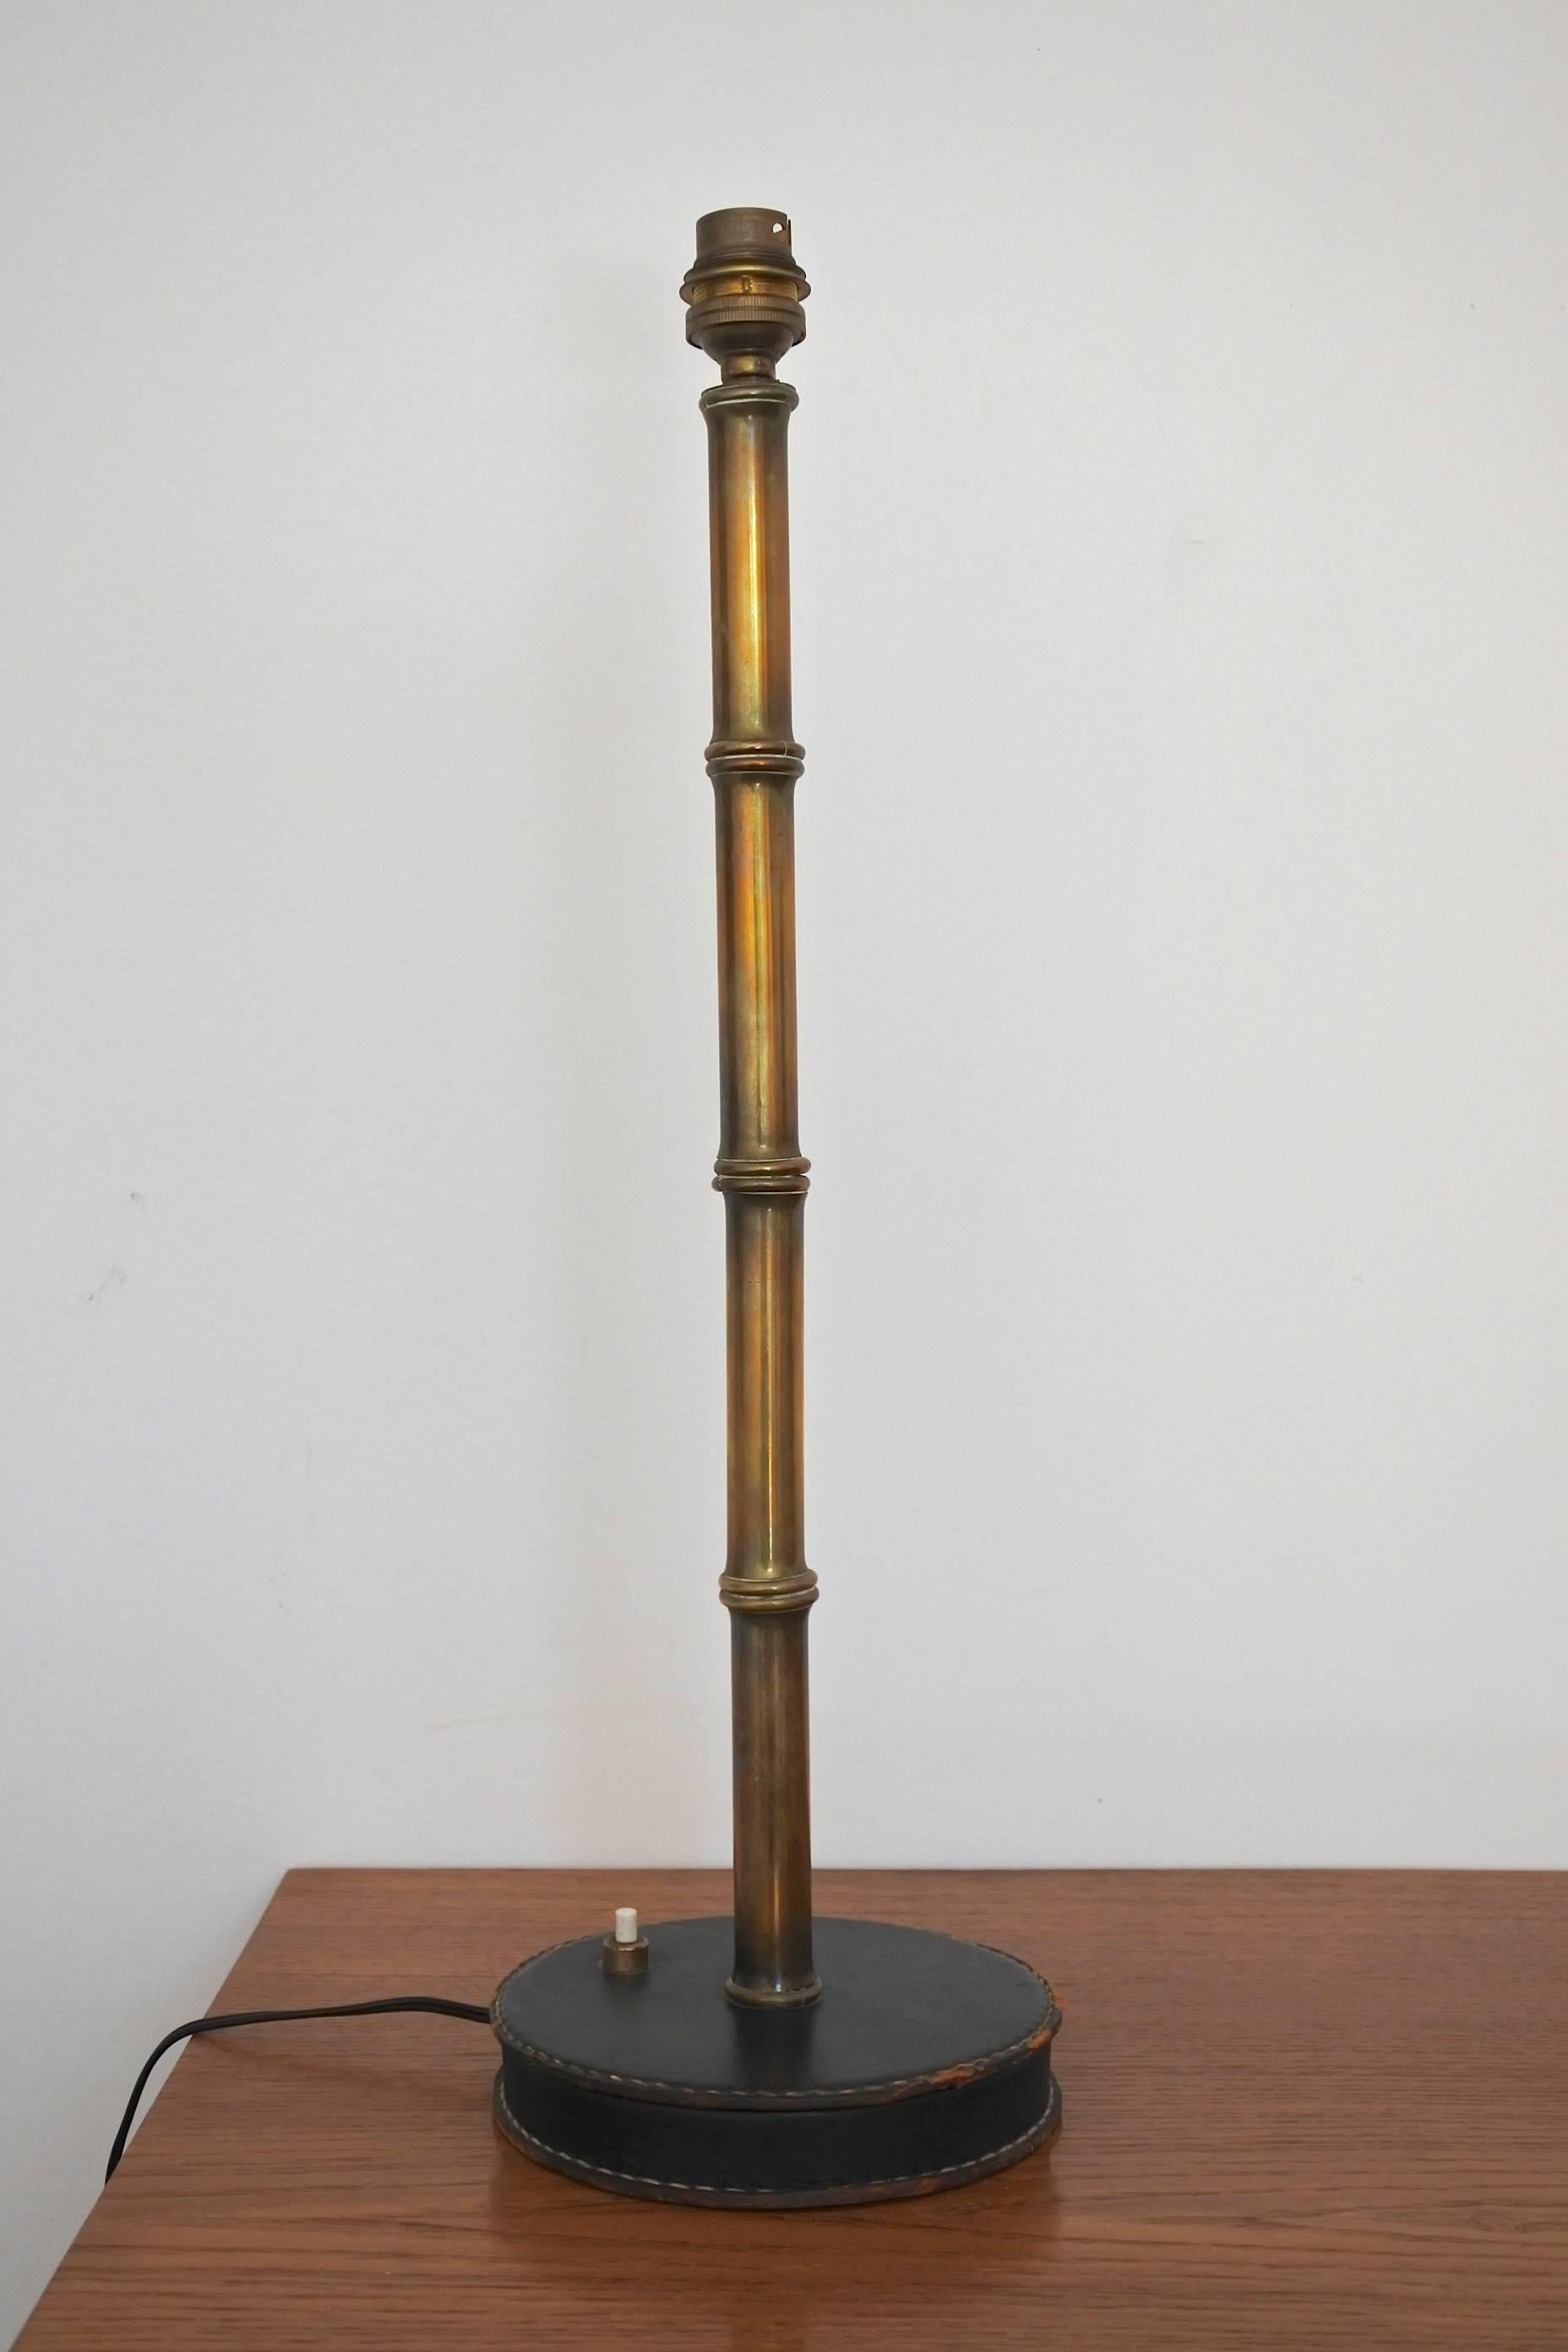 Mid-Century table lamp by French designer Jacques Adnet.
Faux bamboo solid brass and hand-stitched black leather.
A similar lamp is documented in the book "Jacques Adnet" by A-R Hardy Les Editions de L'Amateur page 243.
Dimensions